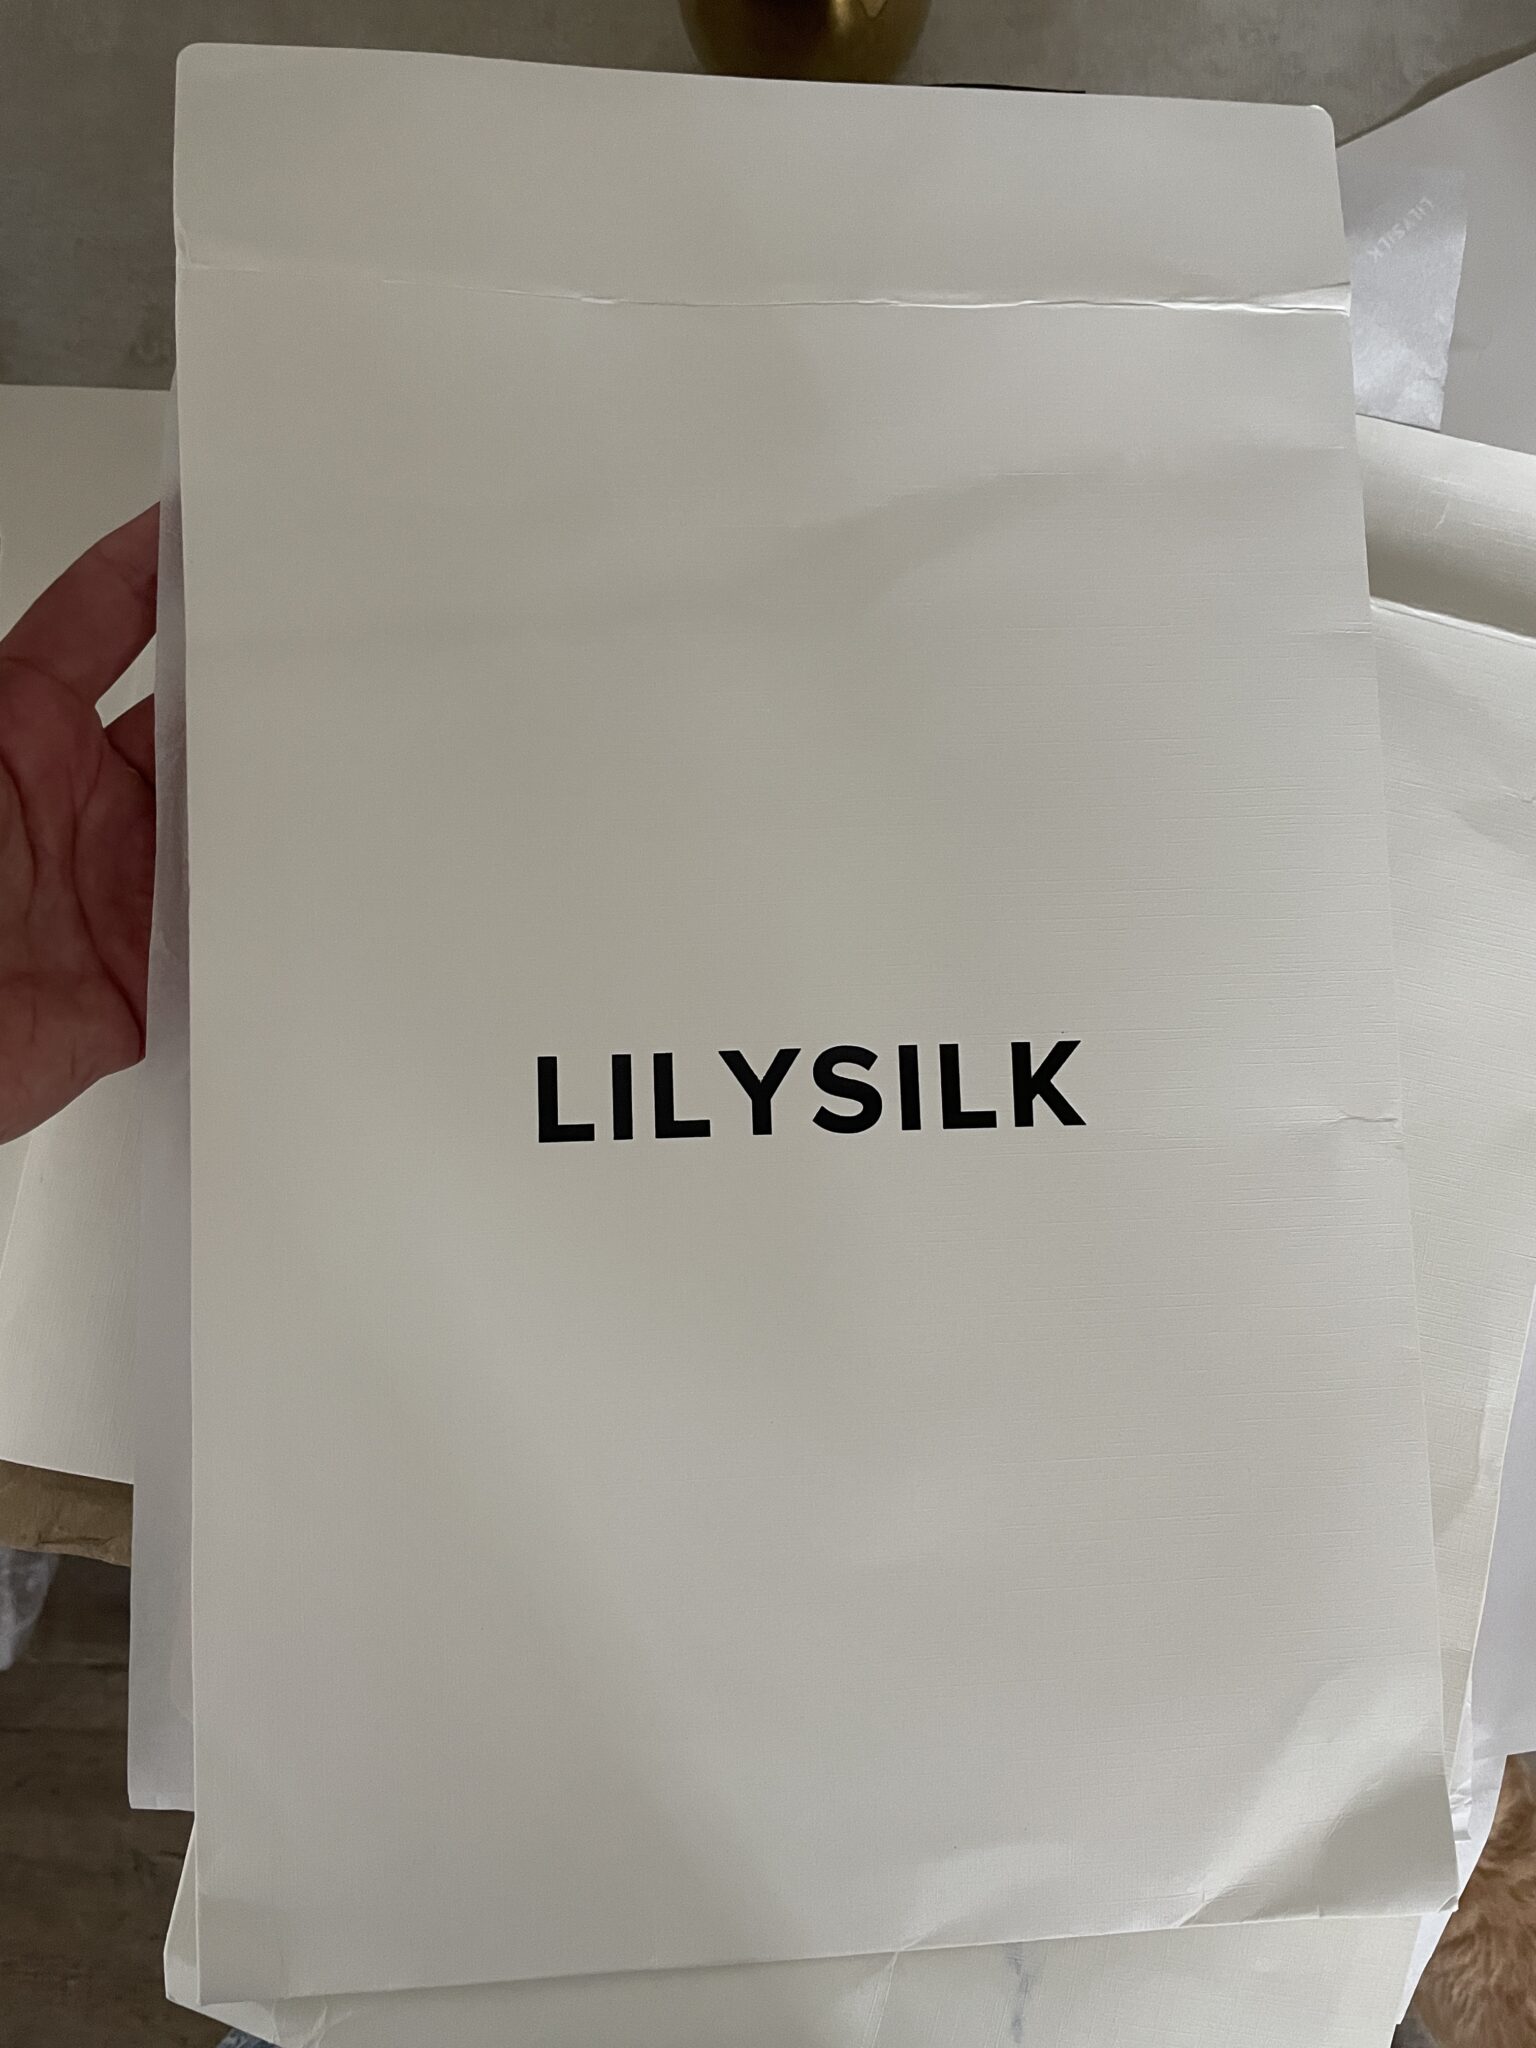 I liked the LILYSILK packaging too!